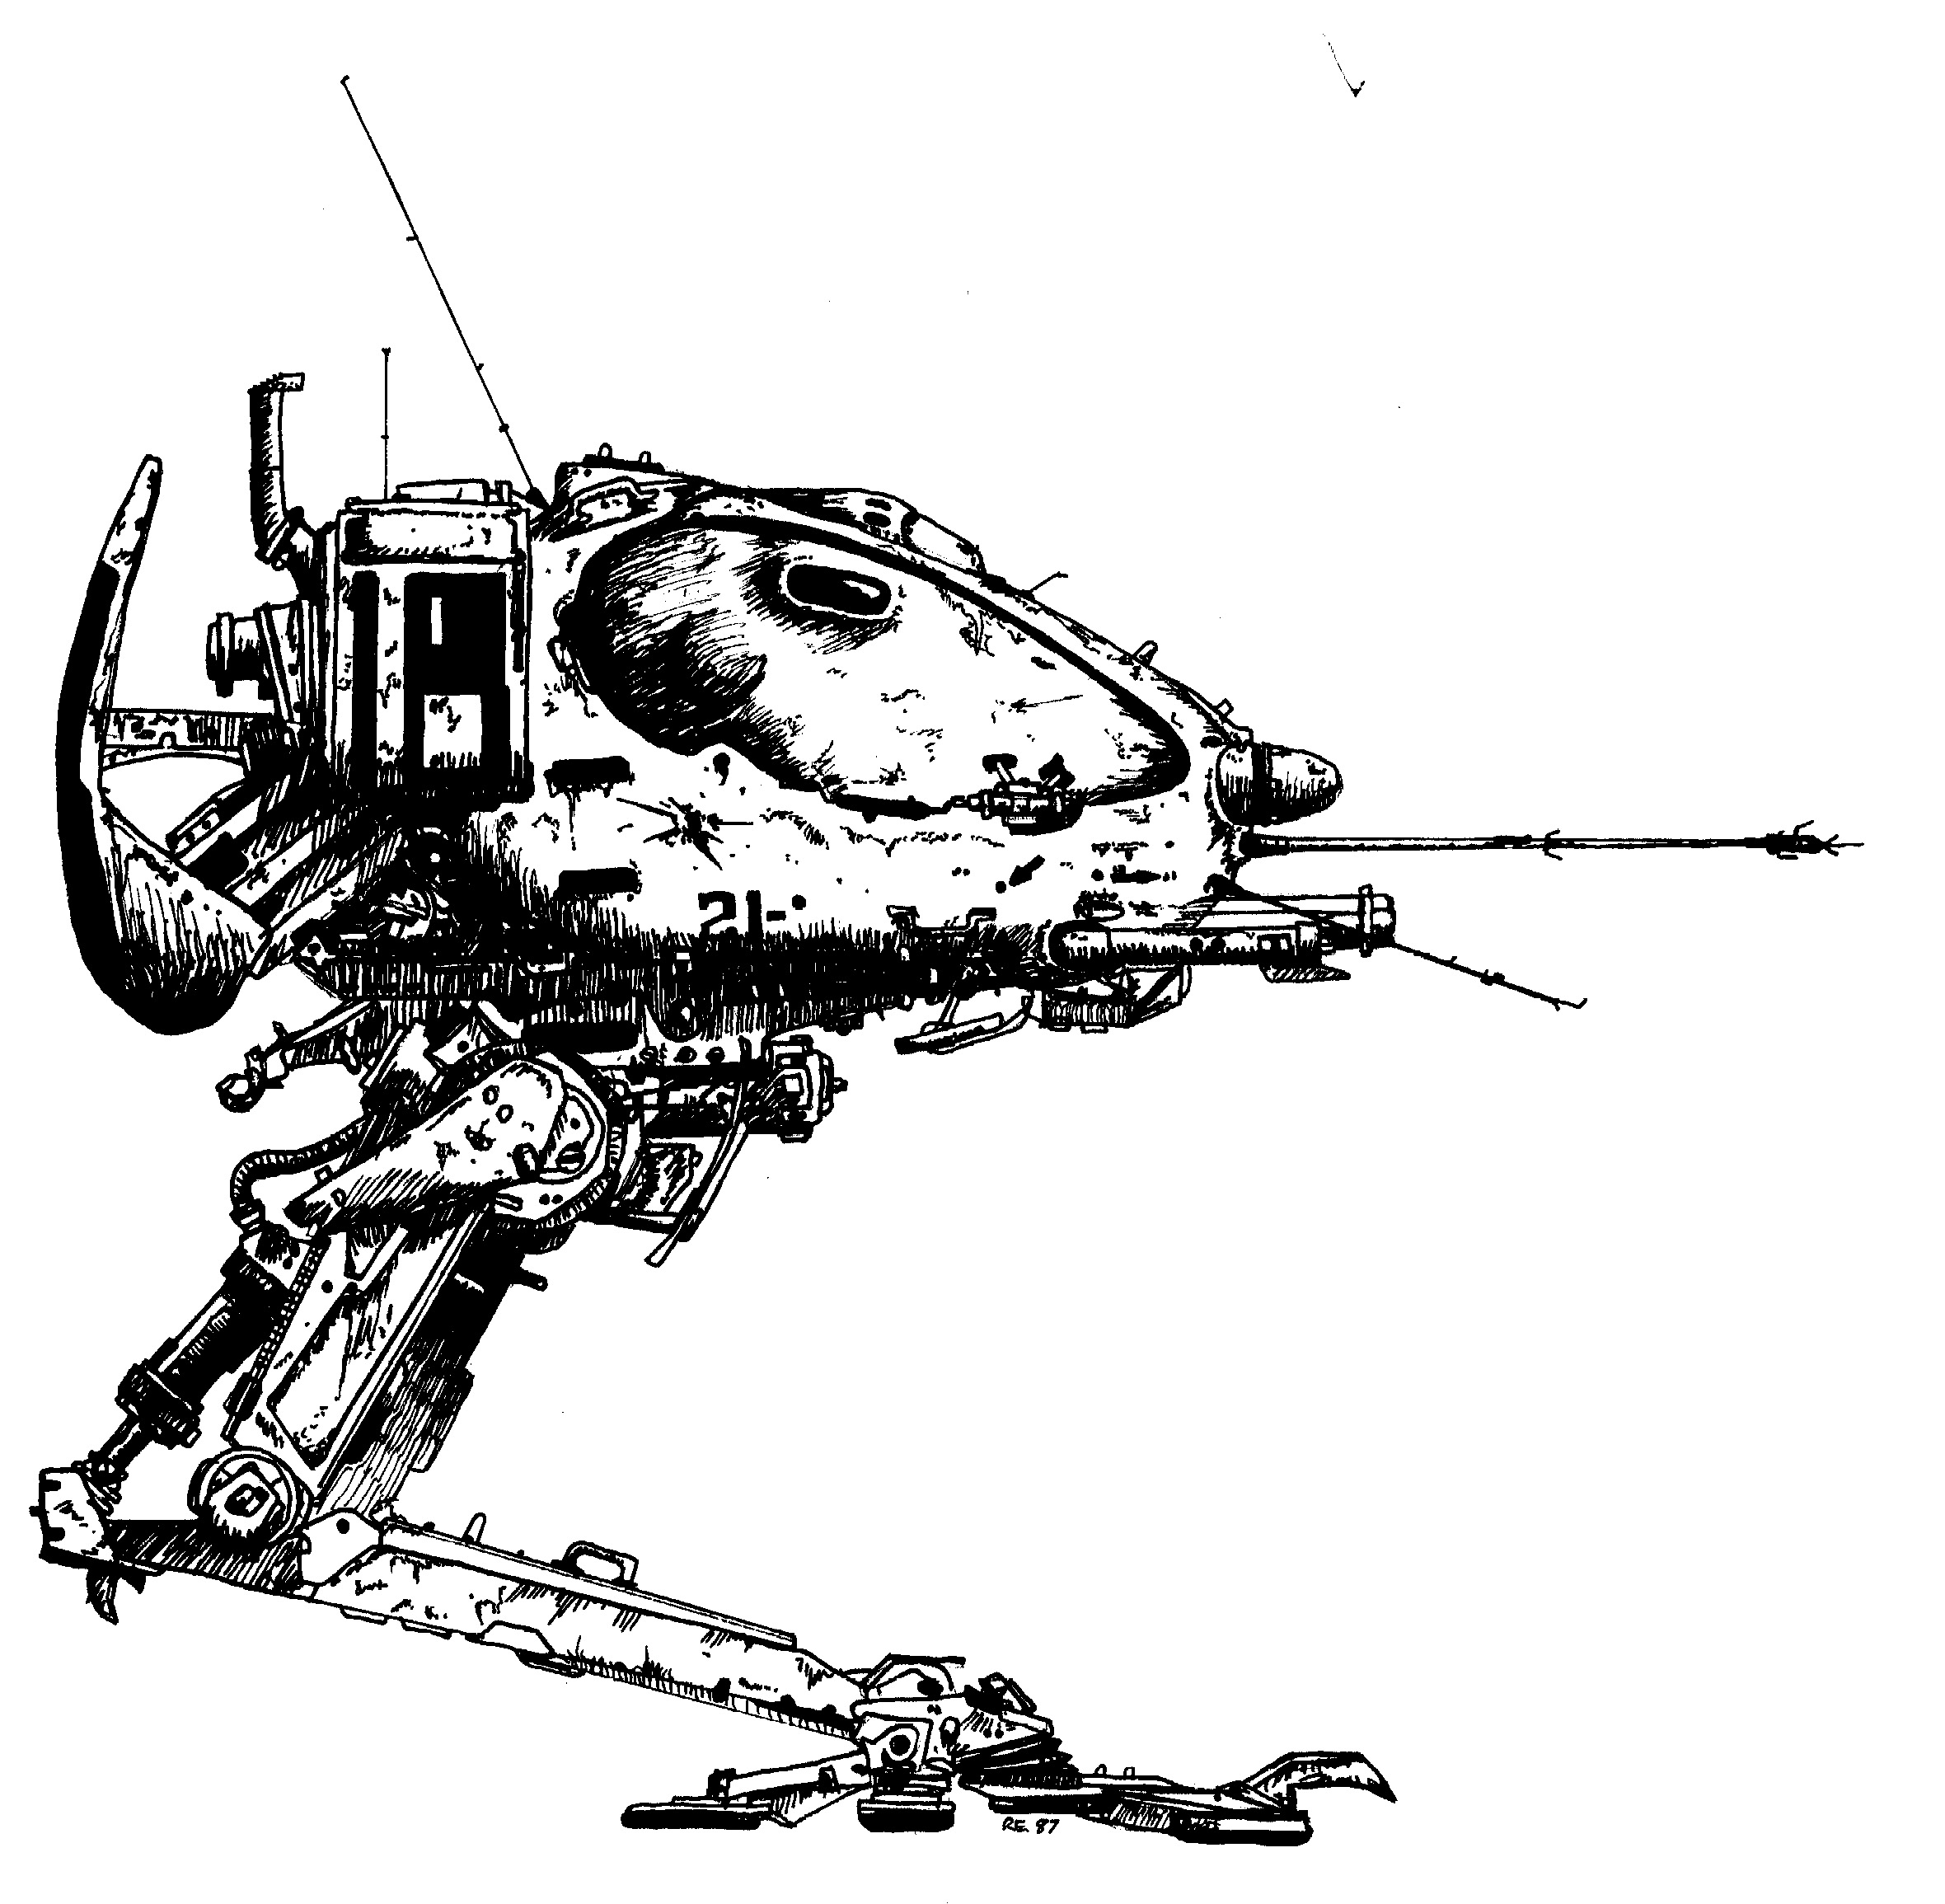 A side view of a two legged mechanized vehicle